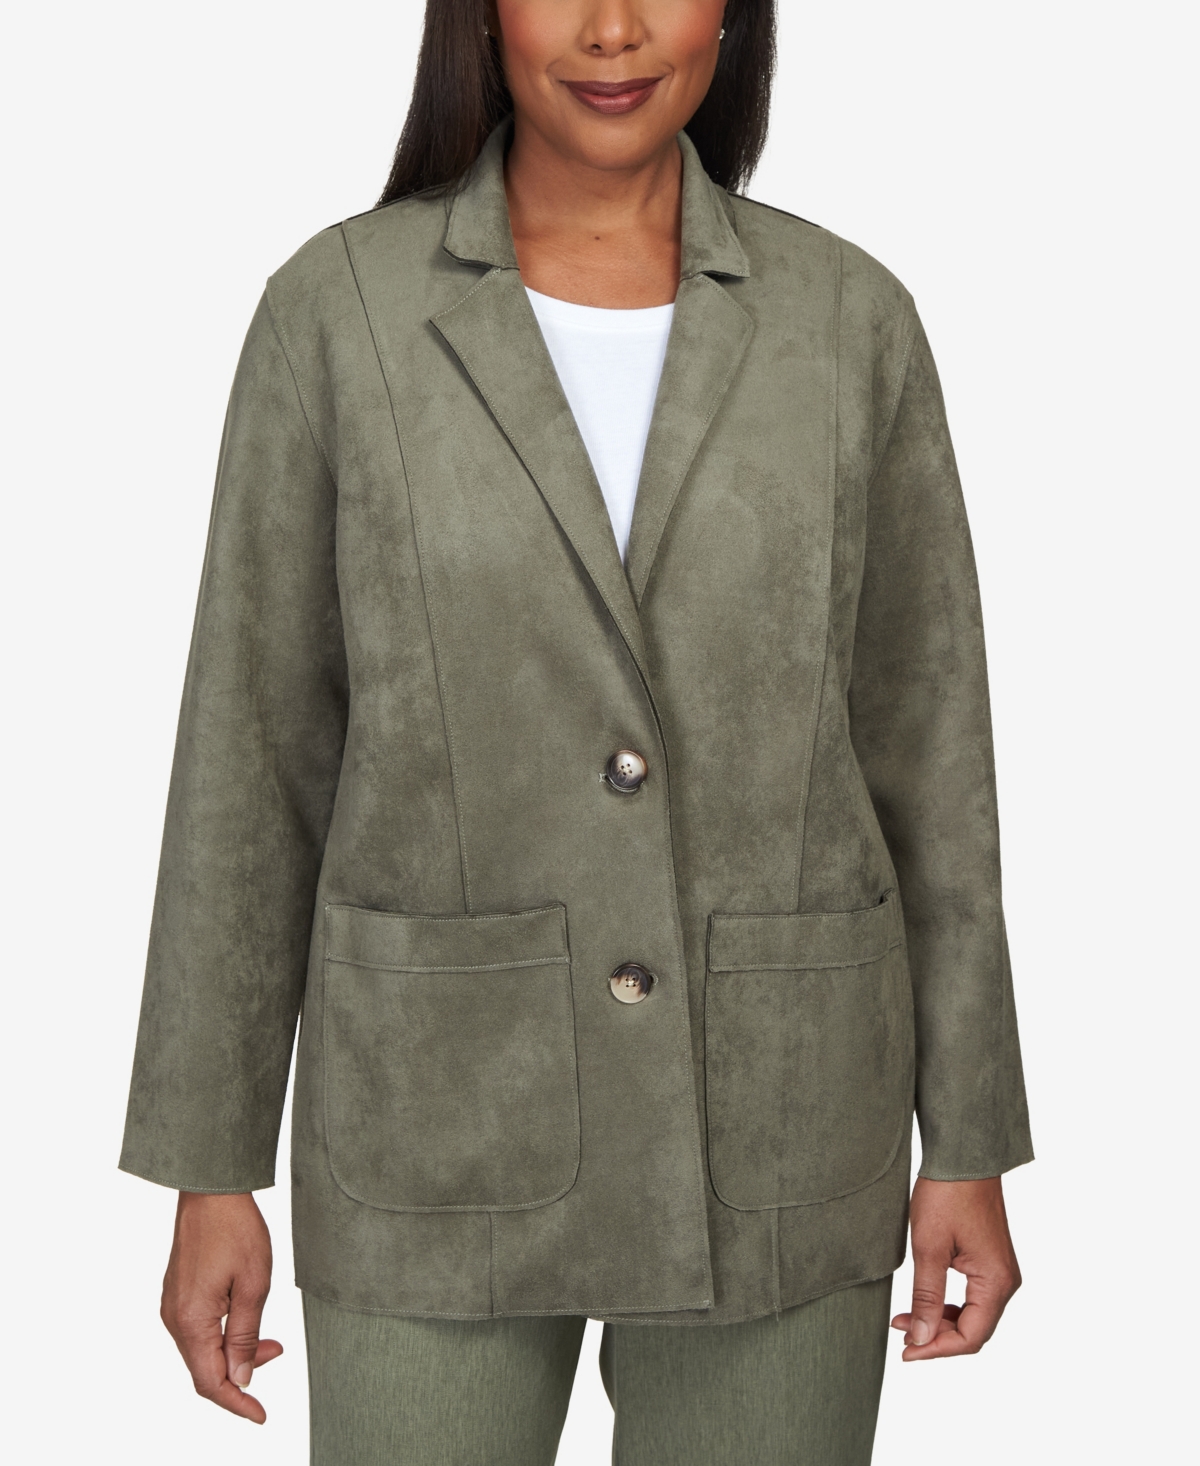 ALFRED DUNNER PETITE CHELSEA MARKET FAUX SUEDE CAR JACKET